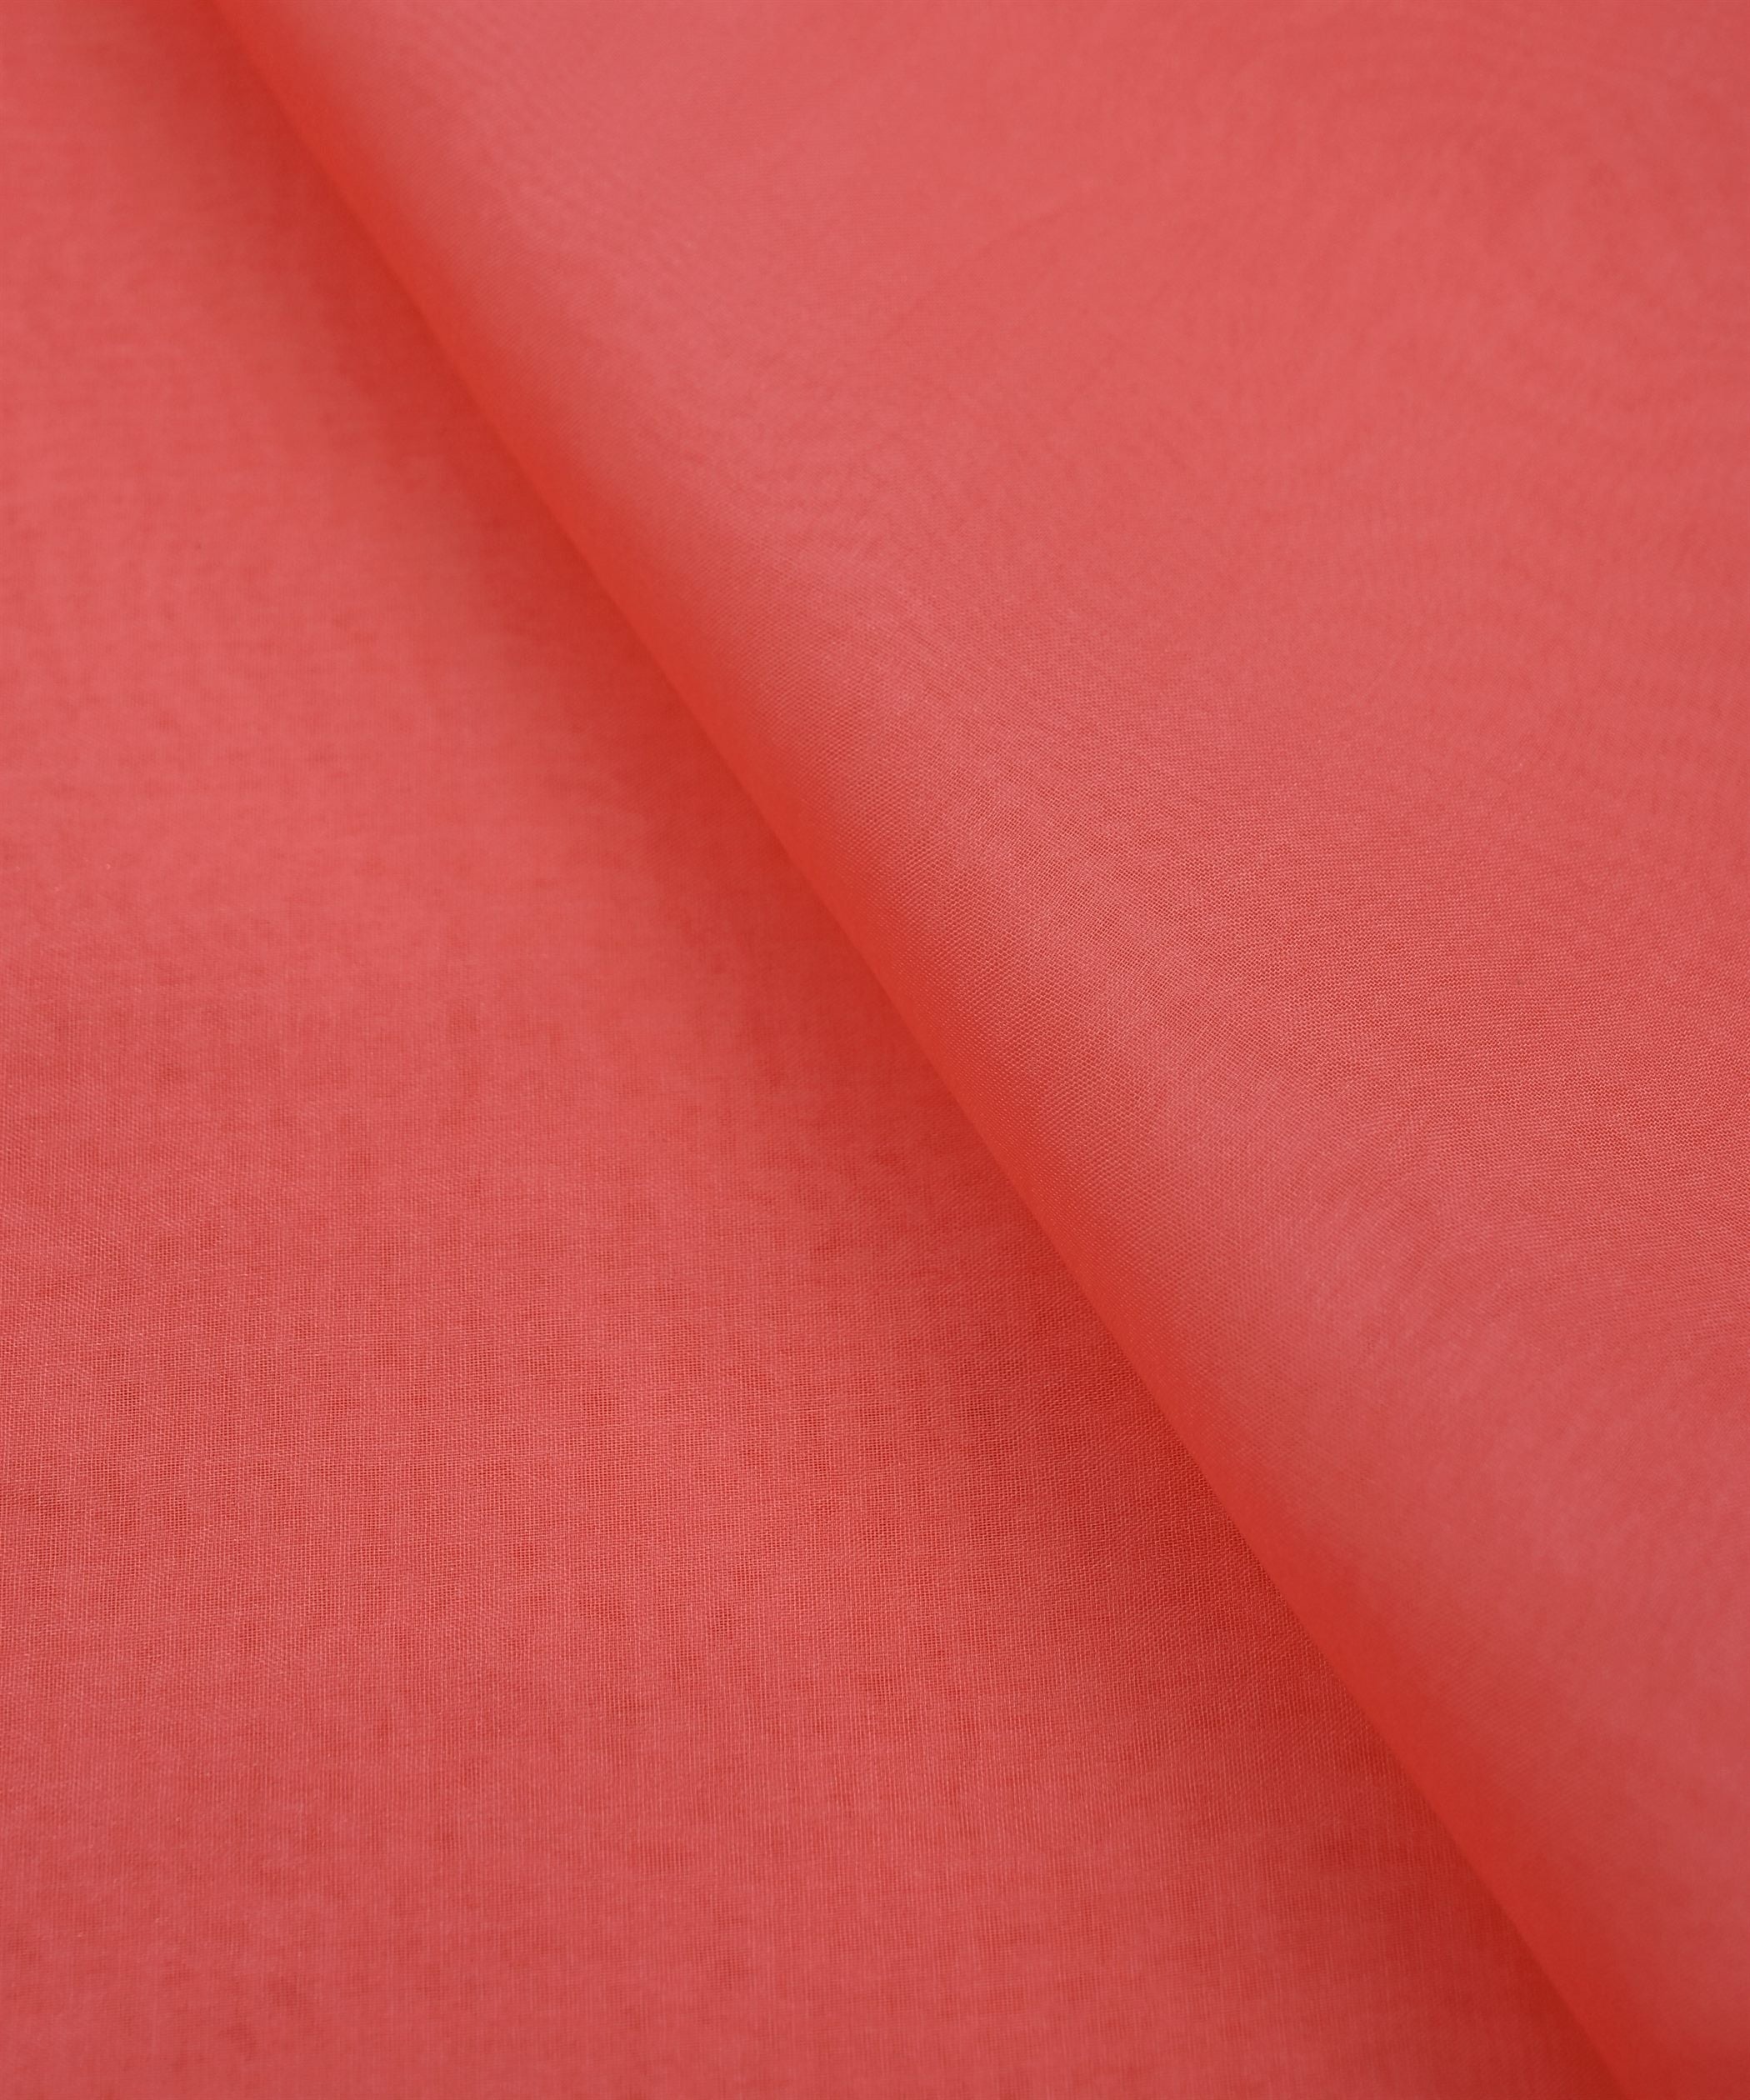 Coral Pink Plain Dyed Organza Fabric